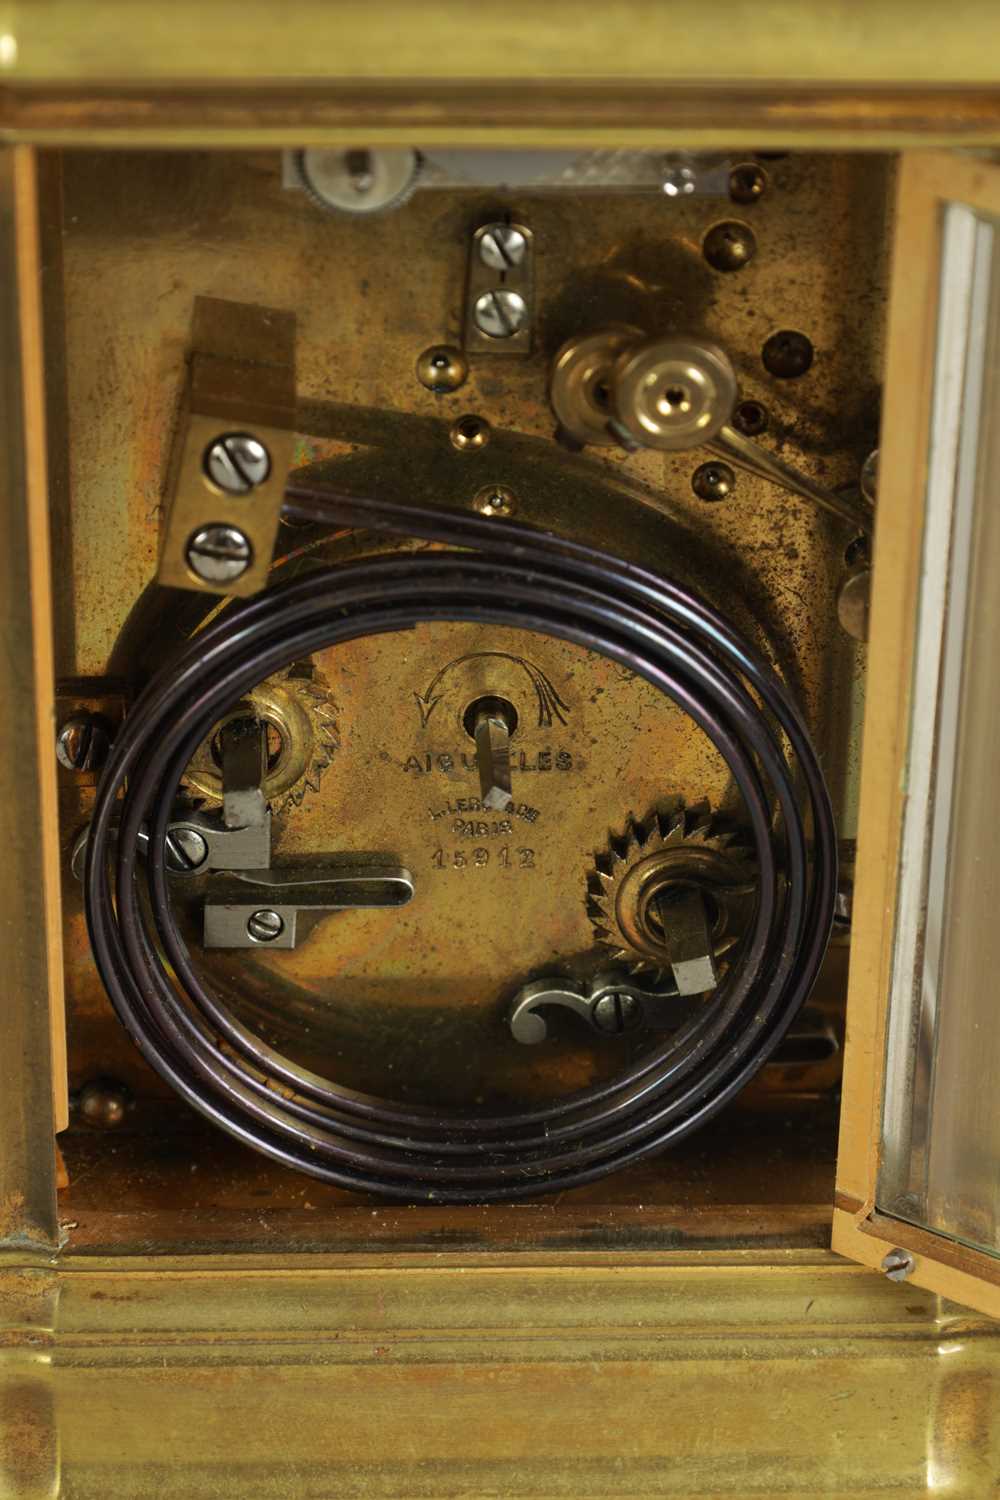 L. LEROY, PARIS. A LATE 19TH CENTURY REPEATING QUARTER CHIMING CARRIAGE CLOCK - Image 7 of 8